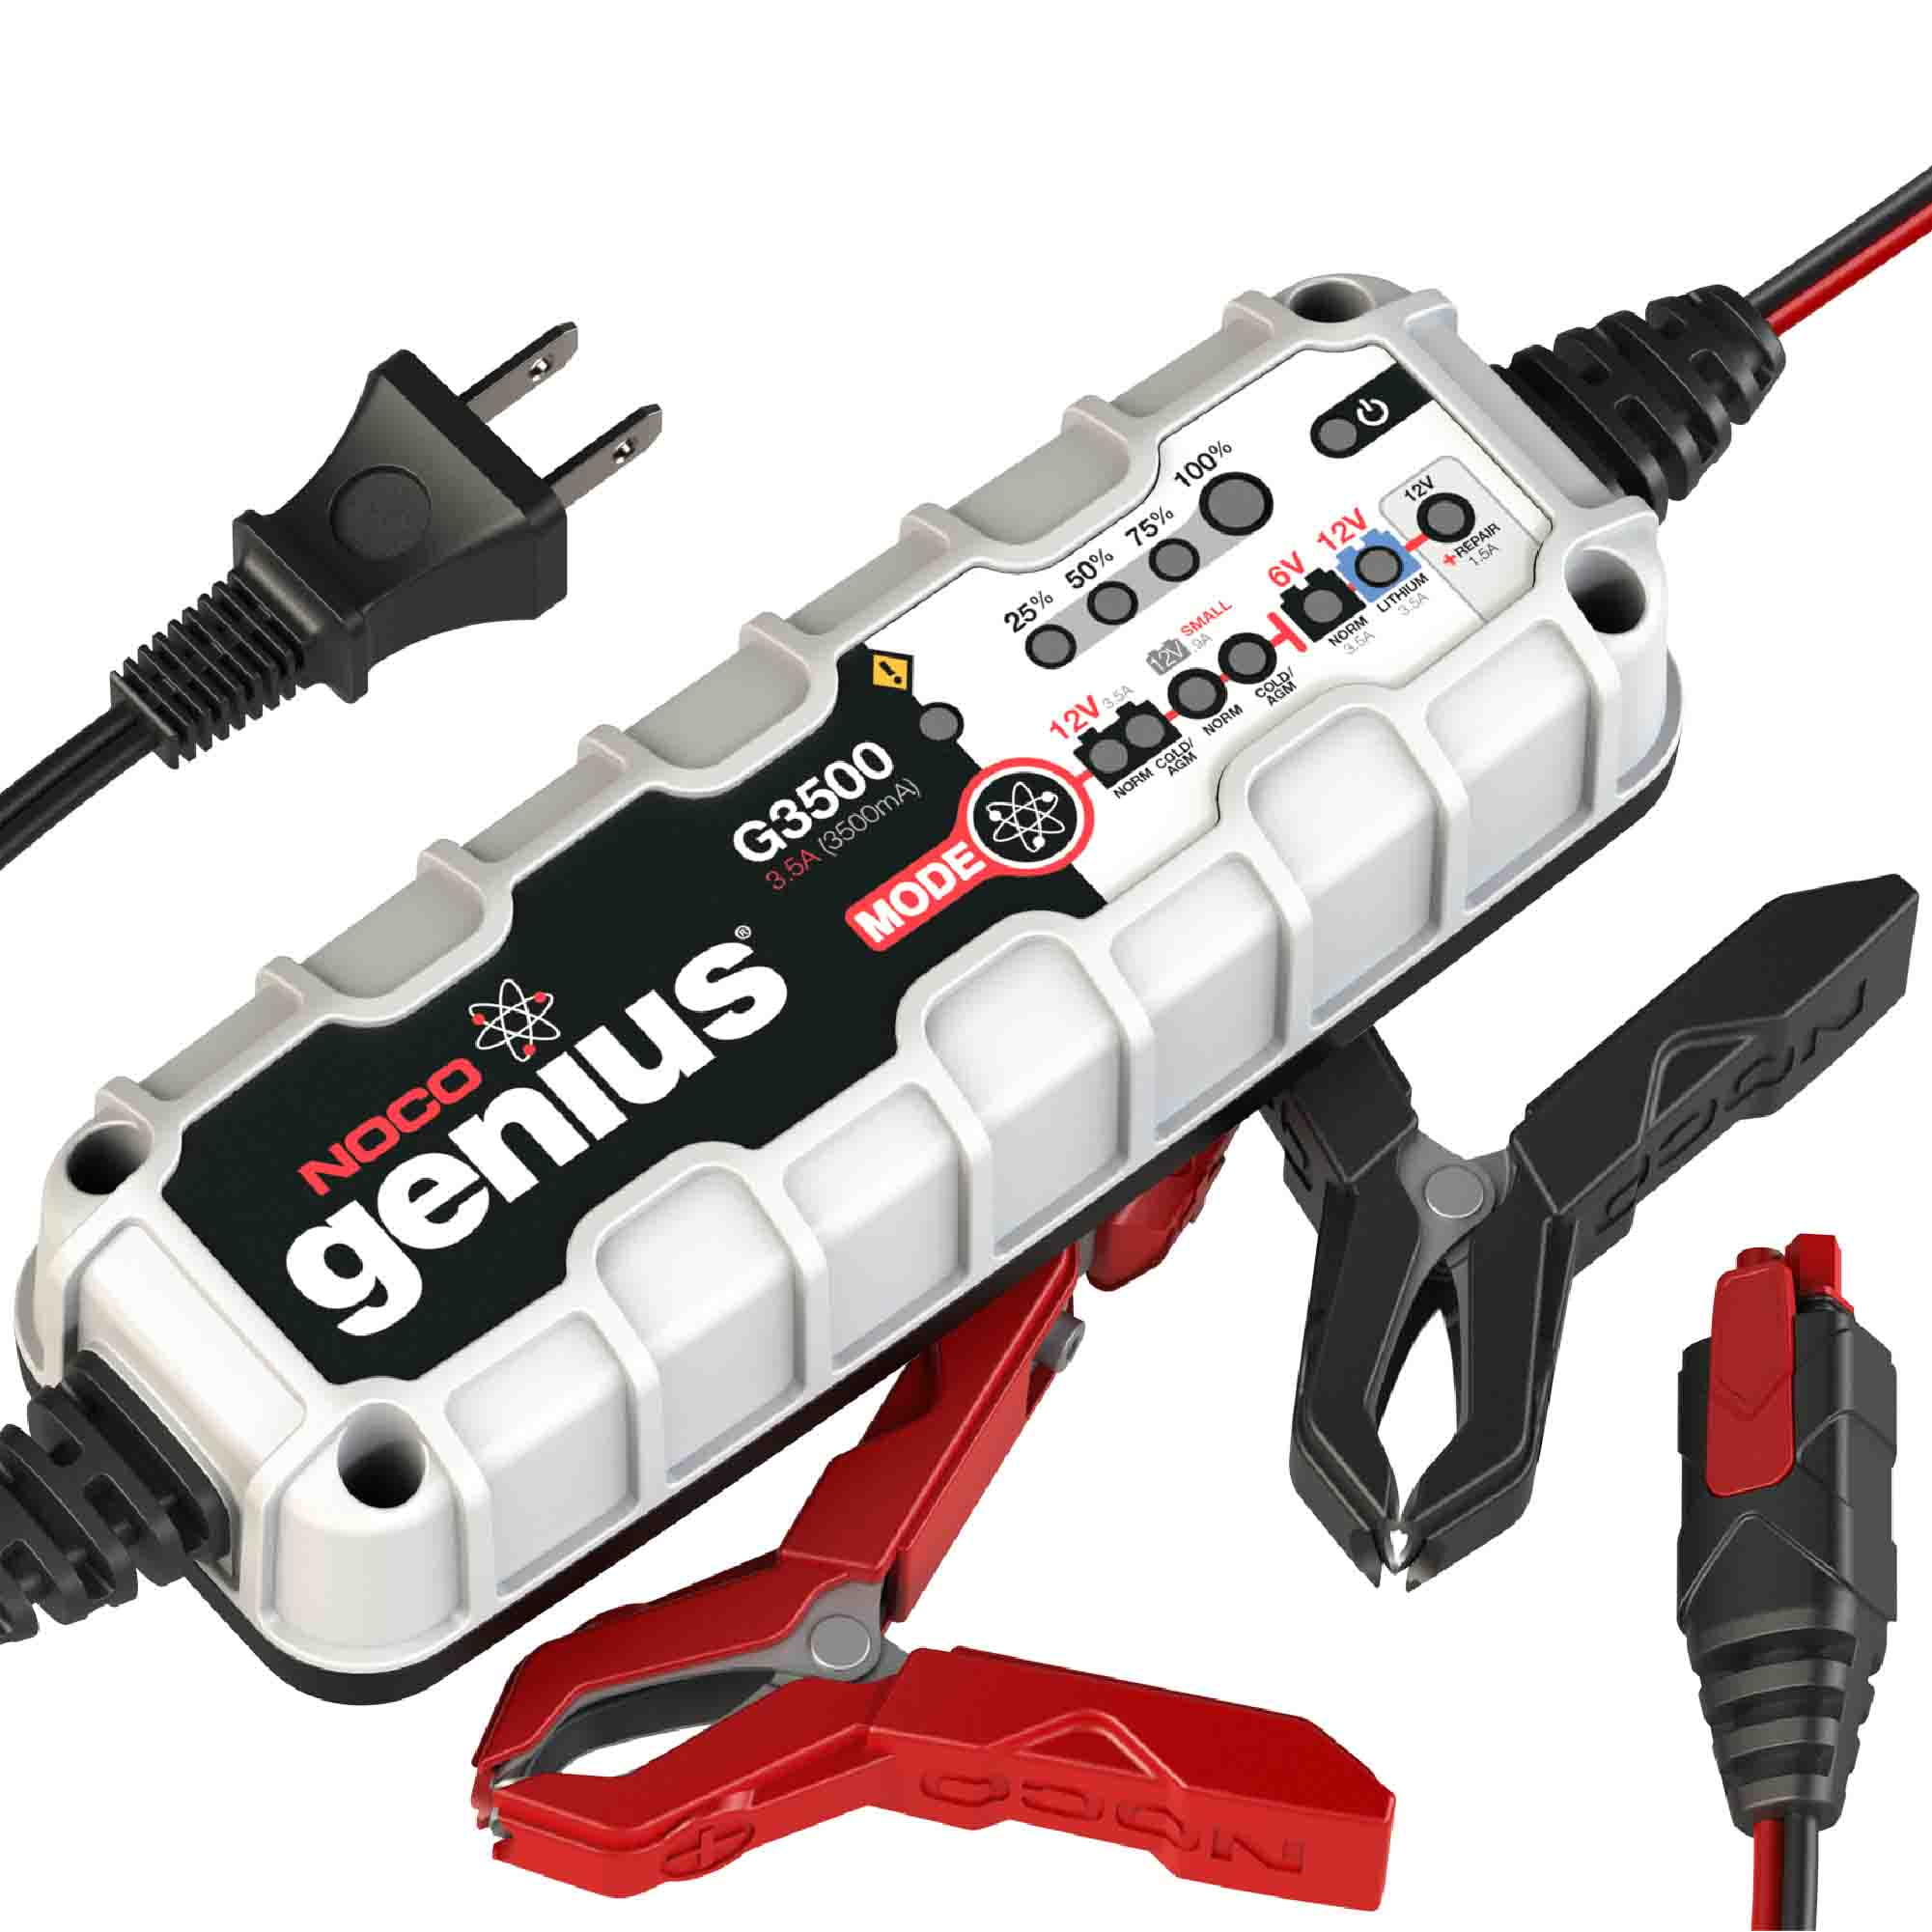 NOCO Genius G3500 6V/12V 3.5 Amp Battery Charger and Maintainer 